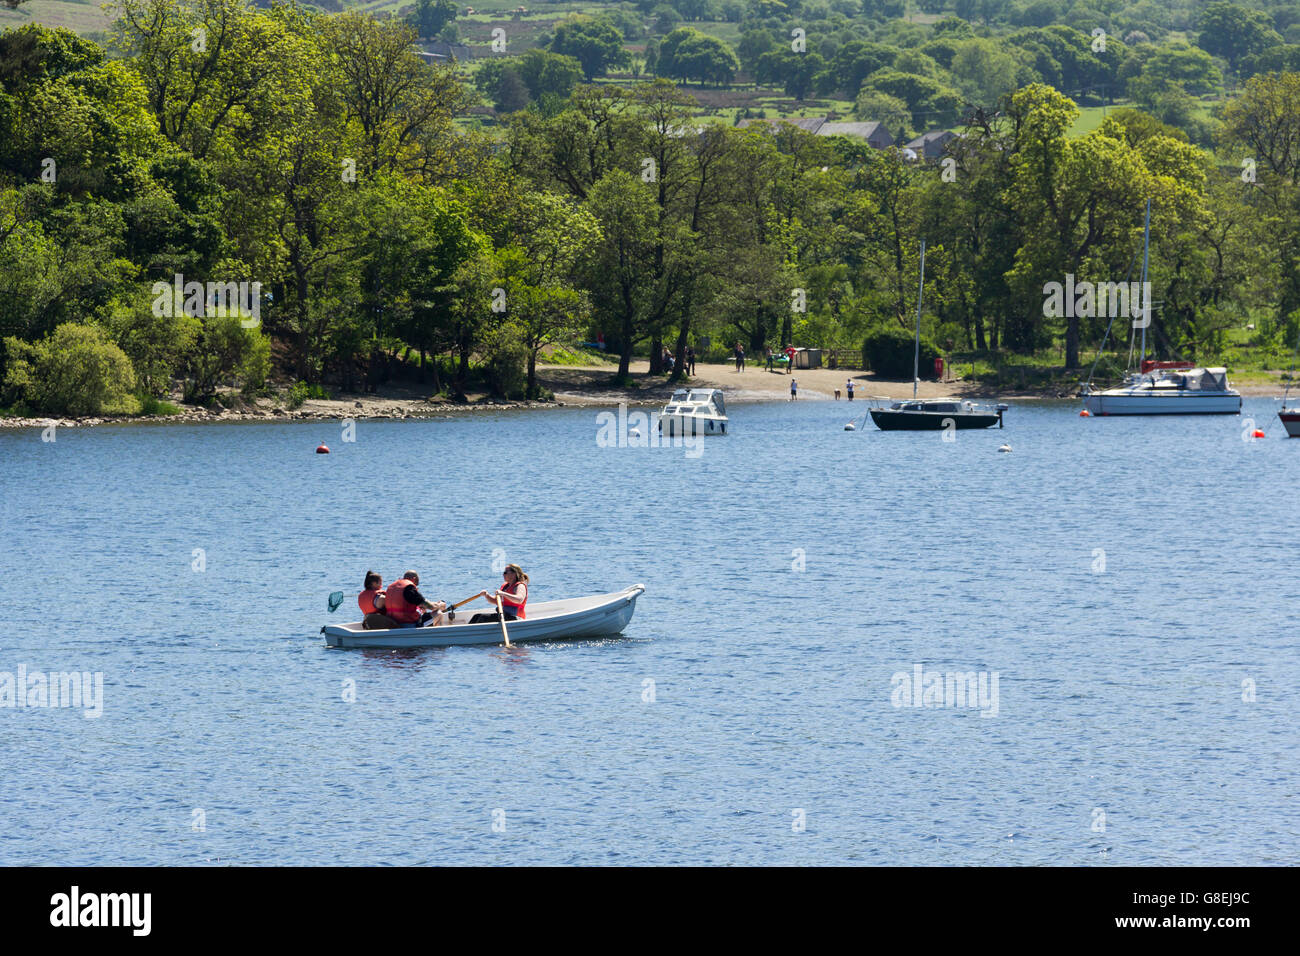 Hire rowing boat, with a group of three people on board, on Ullswater, the second longest lake in the English Lake District Stock Photo